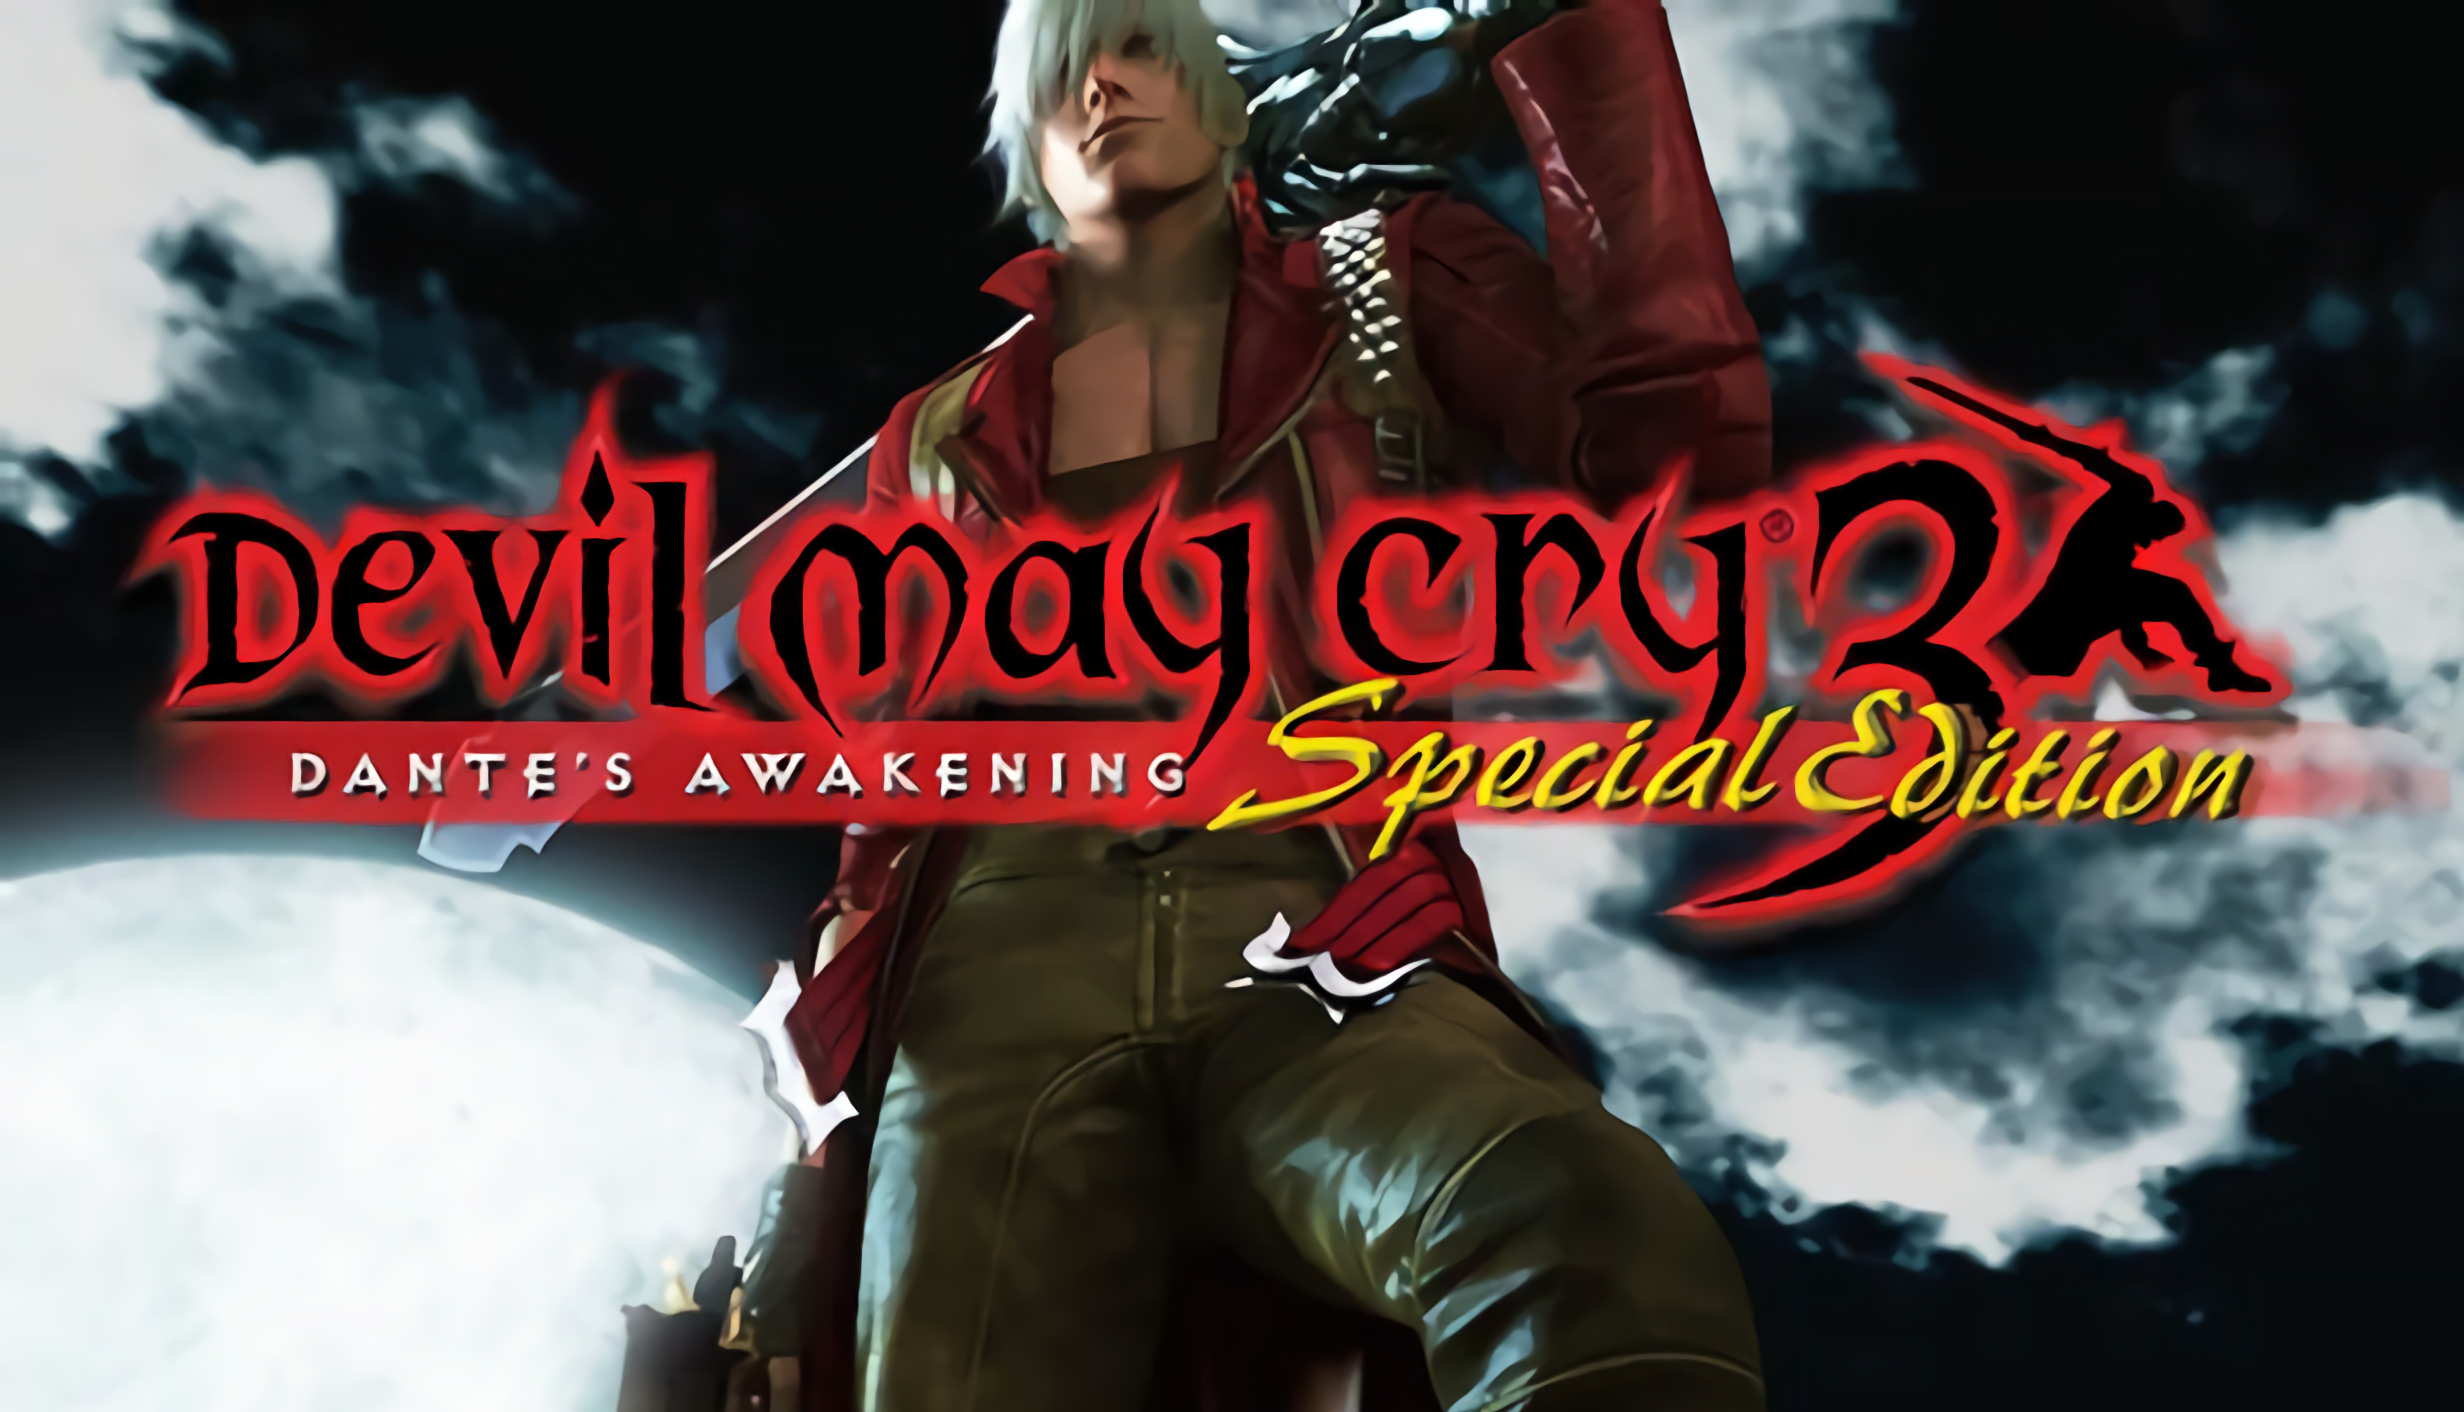 Devil May Cry 3 Special Edition announced for Switch